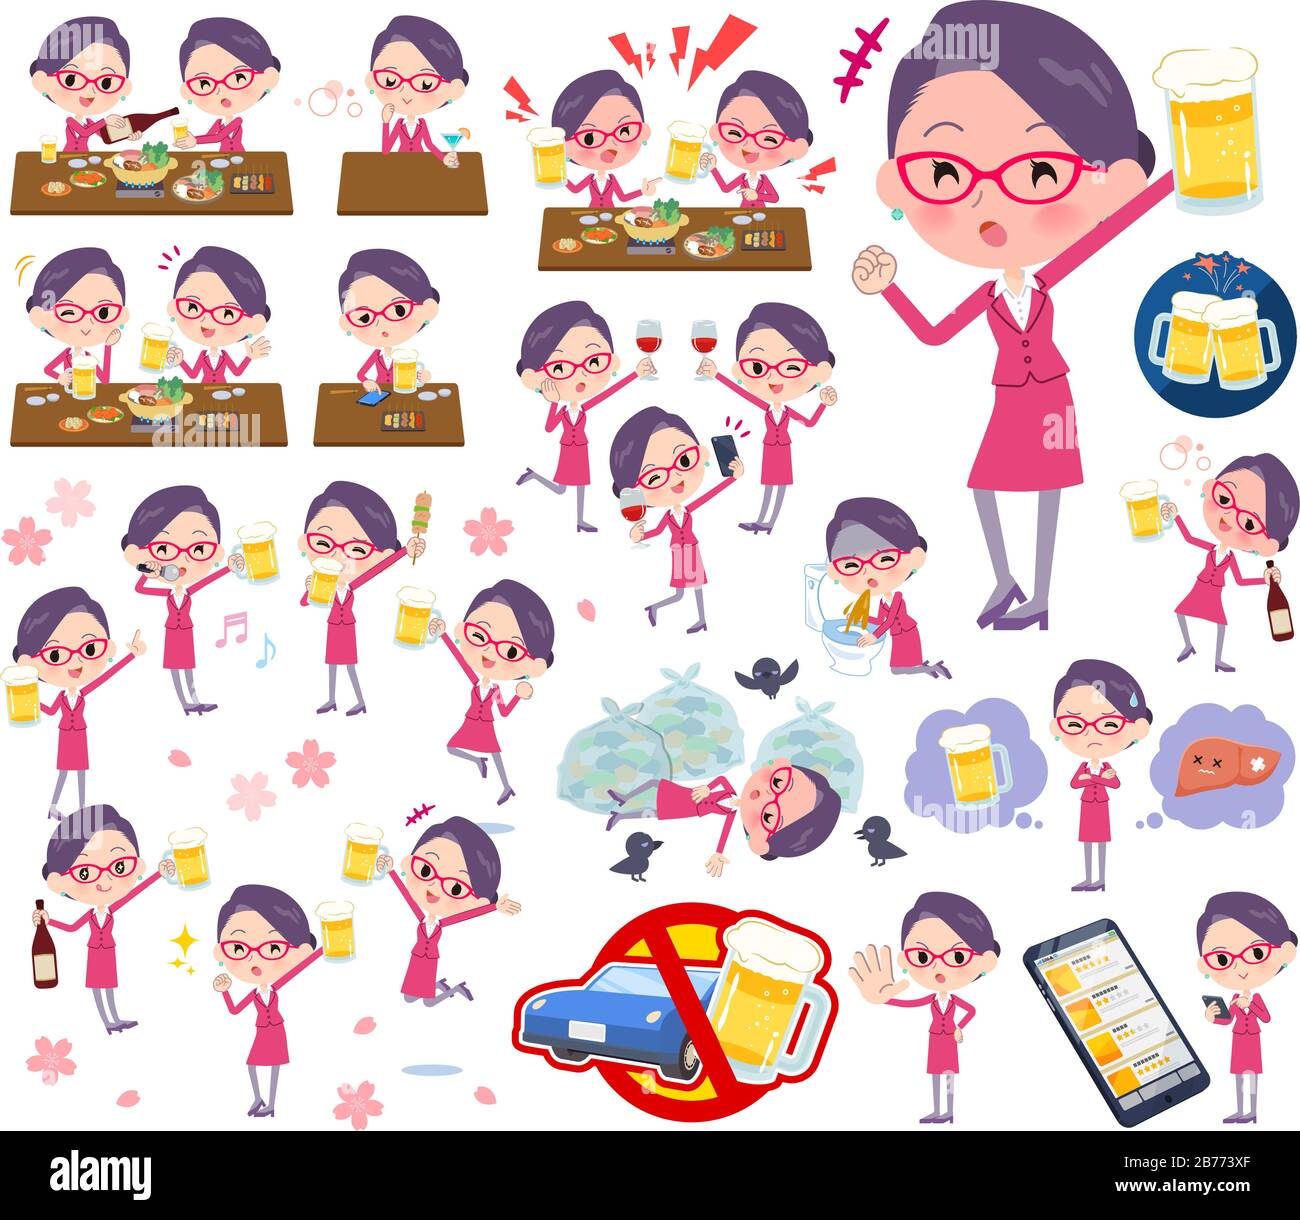 A set of women related to alcohol.There is a lively appearance and action that expresses failure about alcohol.It's vector art so it's easy to edit. Stock Vector